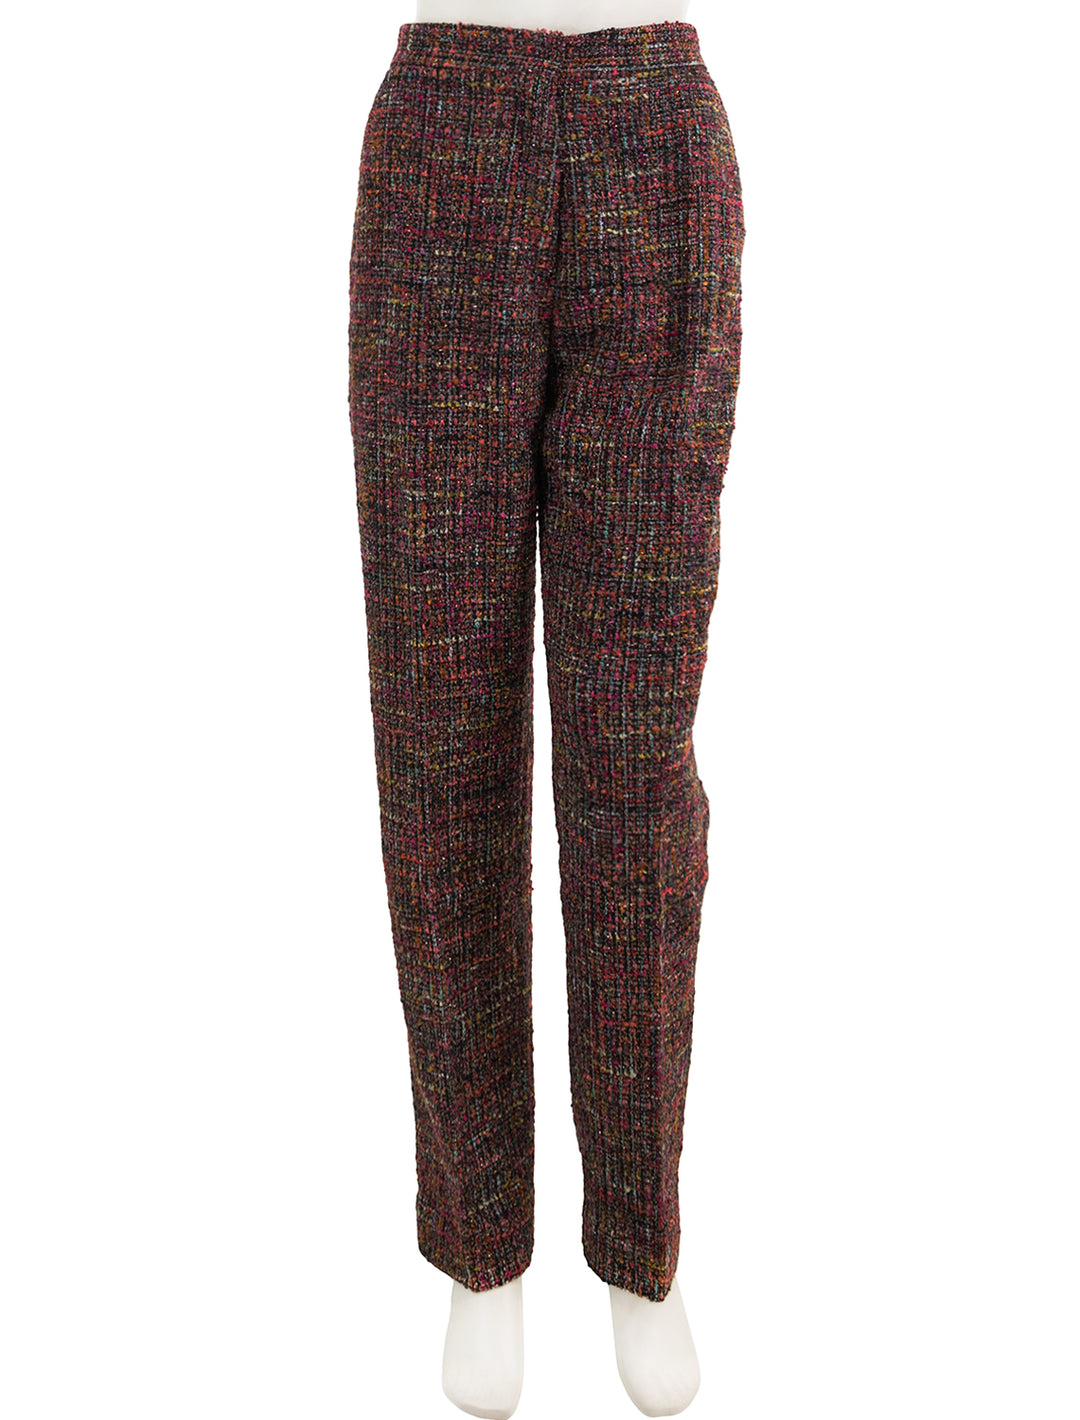 Front view of Saloni's Maxima Trouser in Motley Tweed.